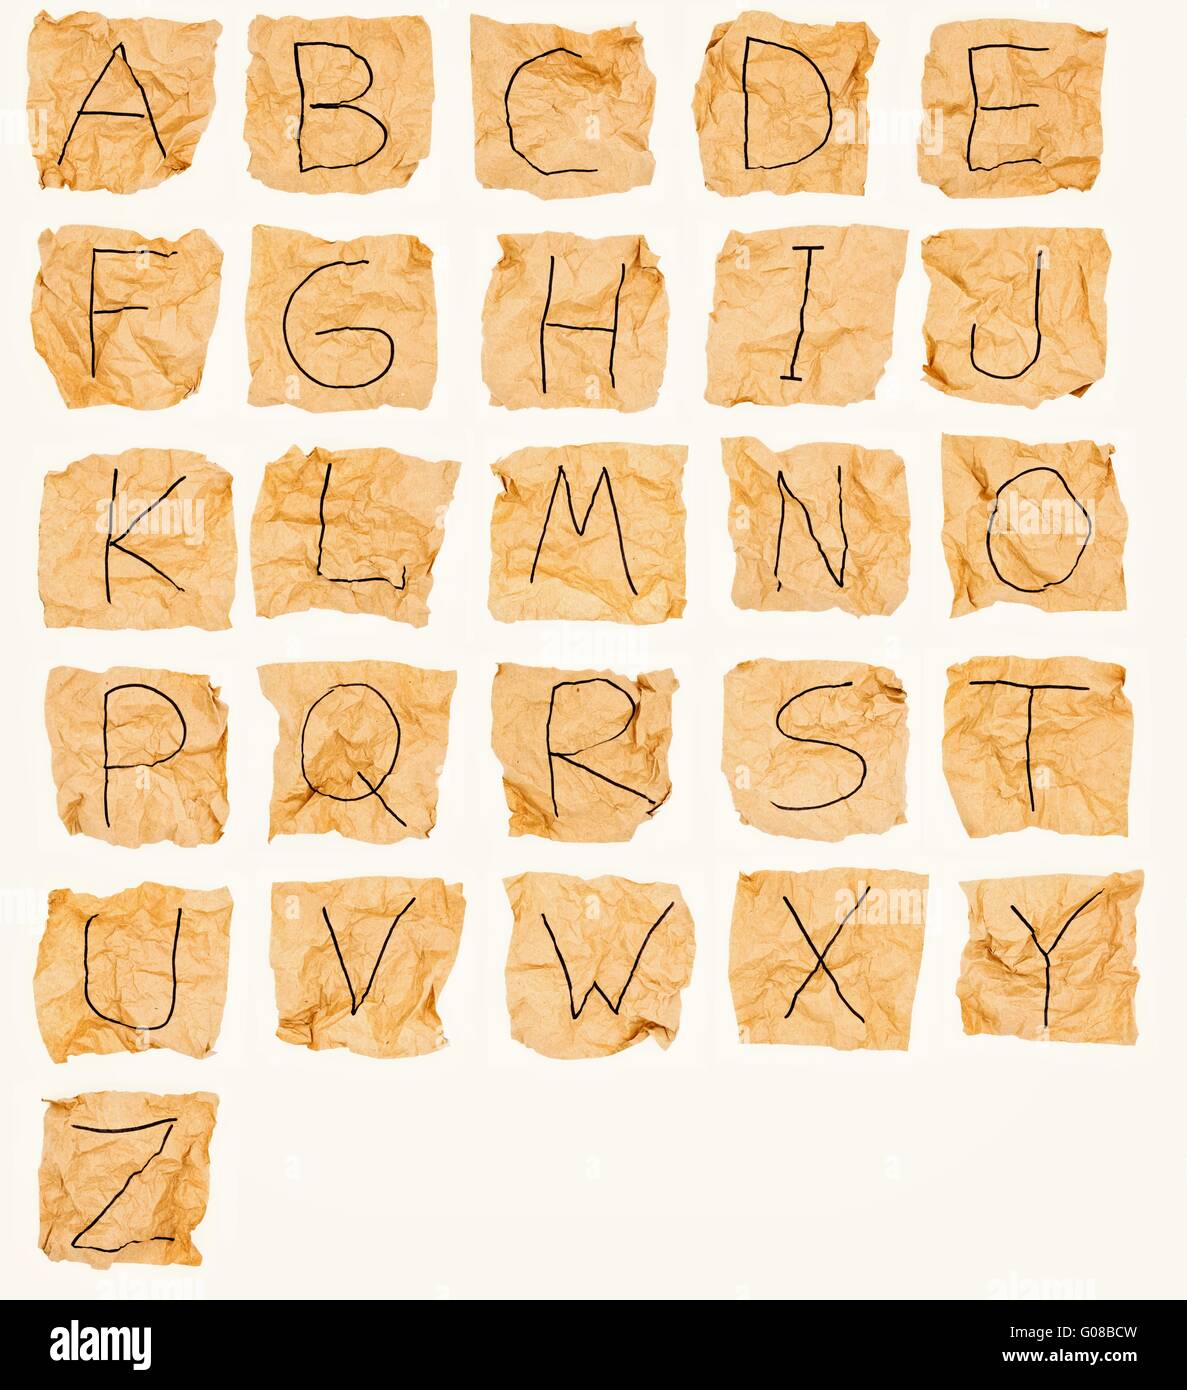 Alphabet made of crumpled paper. Stock Photo